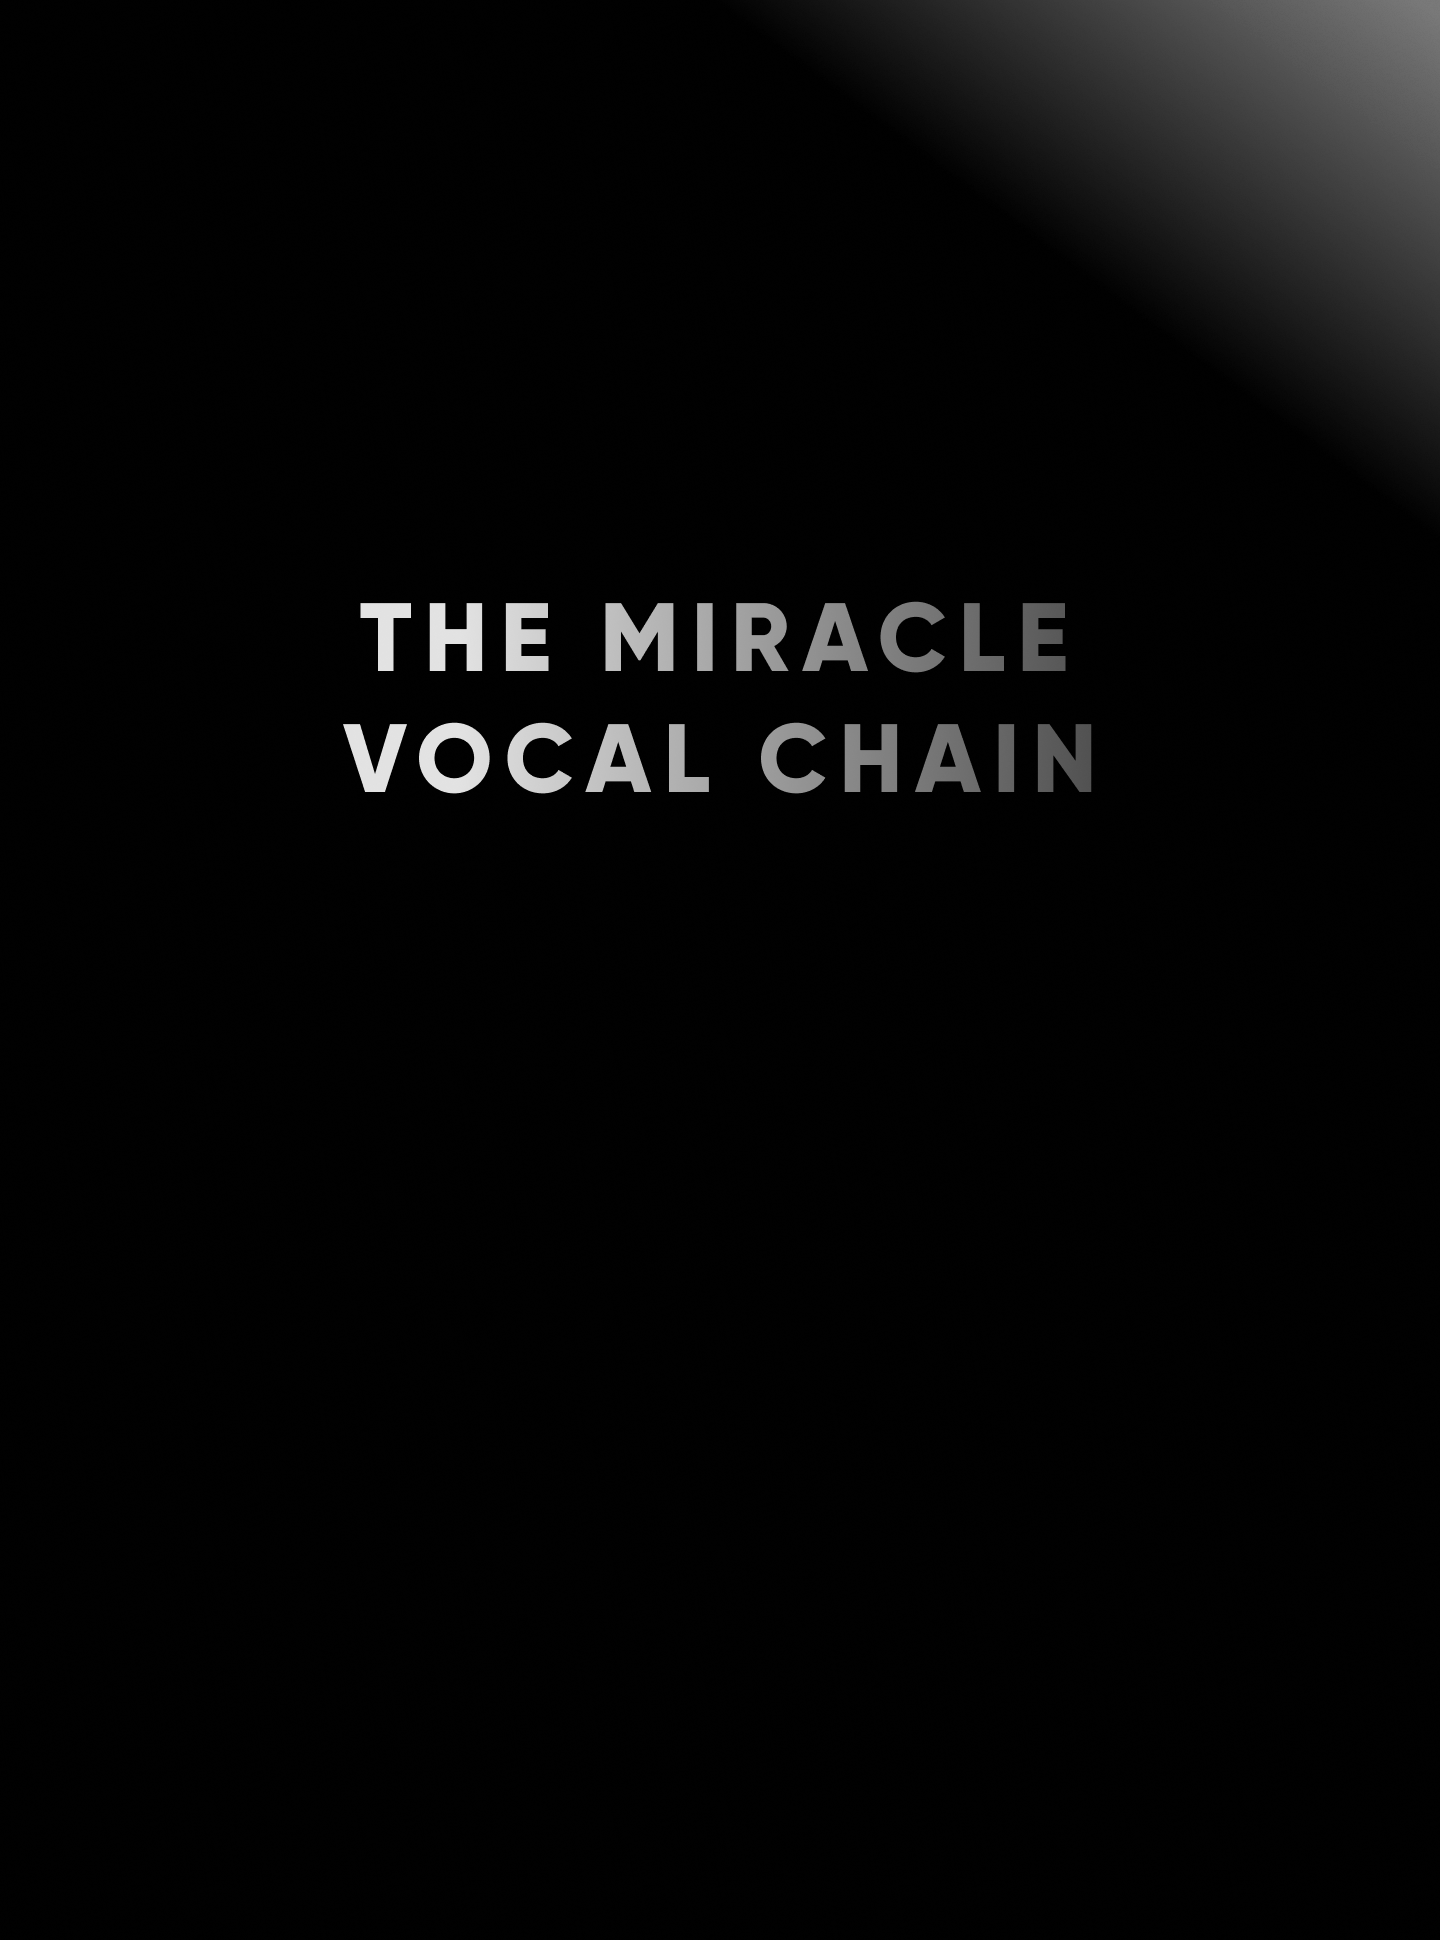 The Miracle Vocal Chain Logo